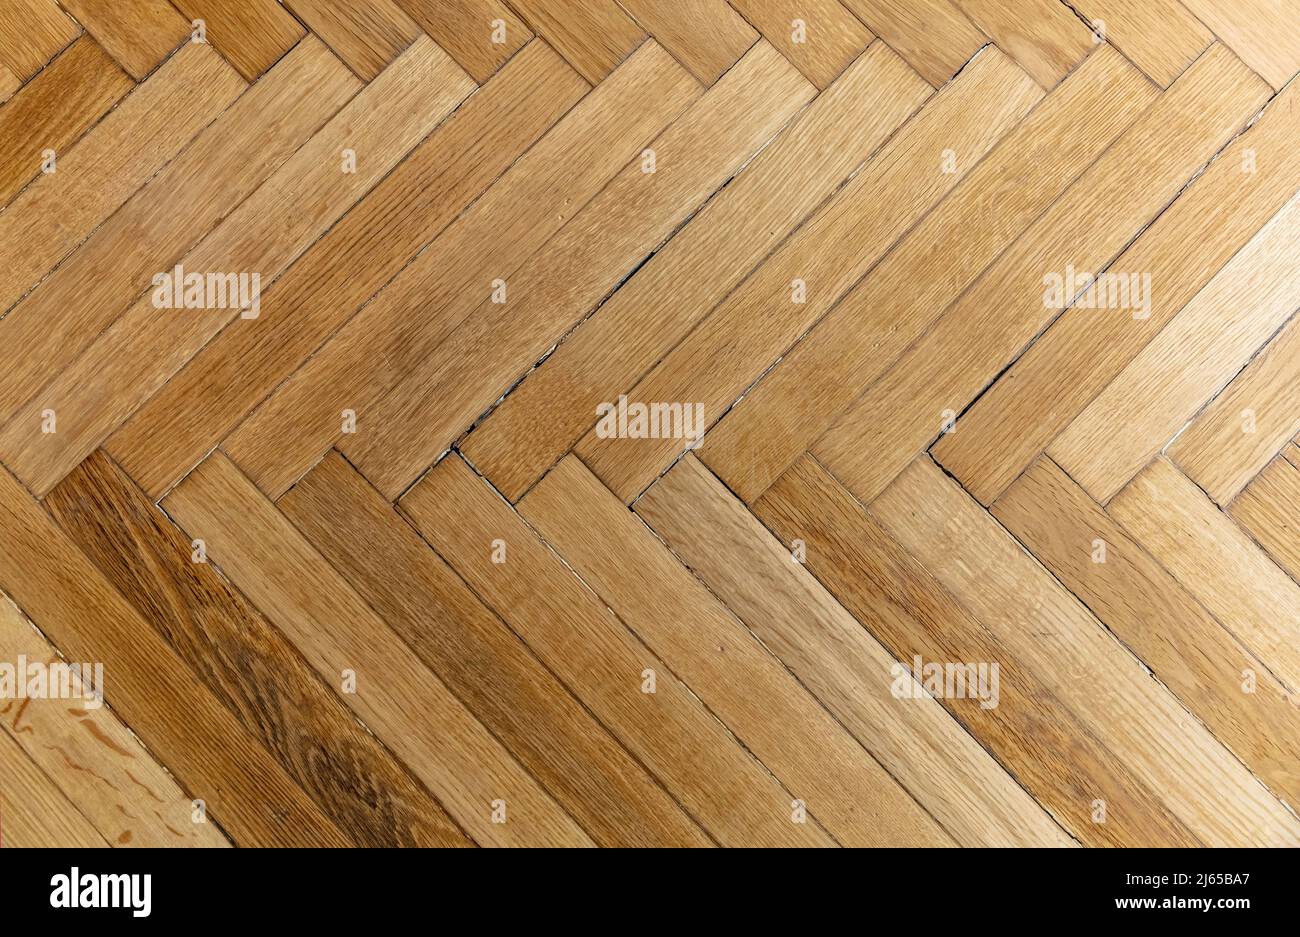 Wood Flooring | Sustainable | Affordable | Durable | Fitted